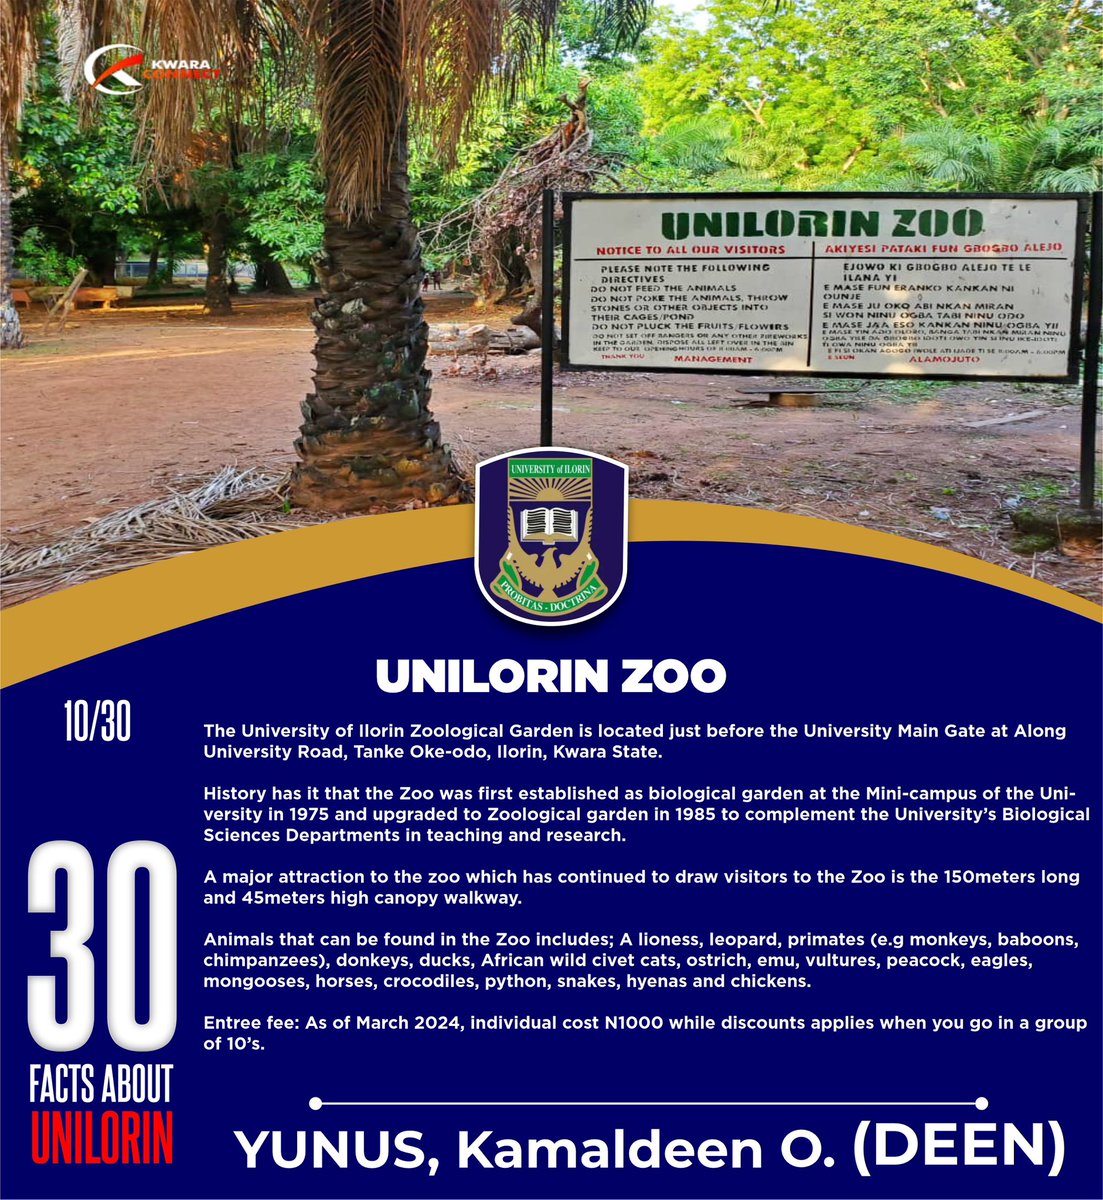 🔥MUST READ

30 FACTS ABOUT UNILORIN🎓

10/30 — UNILORIN ZOO🌴🦒